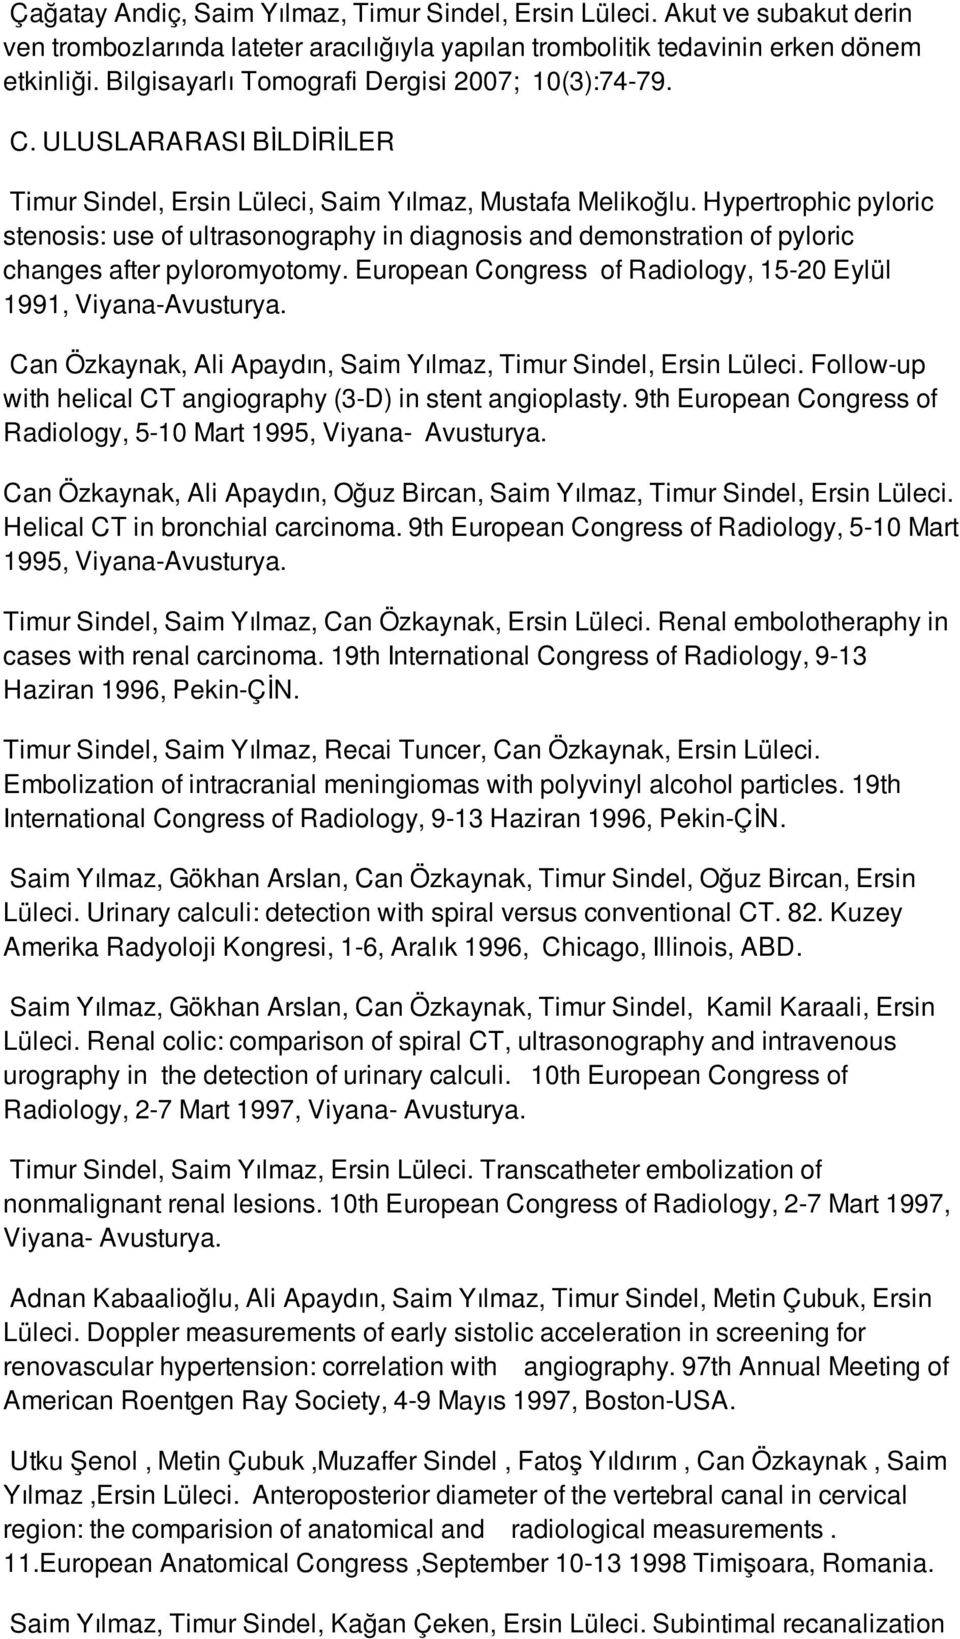 Hypertrophic pyloric stenosis: use of ultrasonography in diagnosis and demonstration of pyloric changes after pyloromyotomy. European Congress of Radiology, 15-20 Eylül 1991, Viyana-Avusturya.